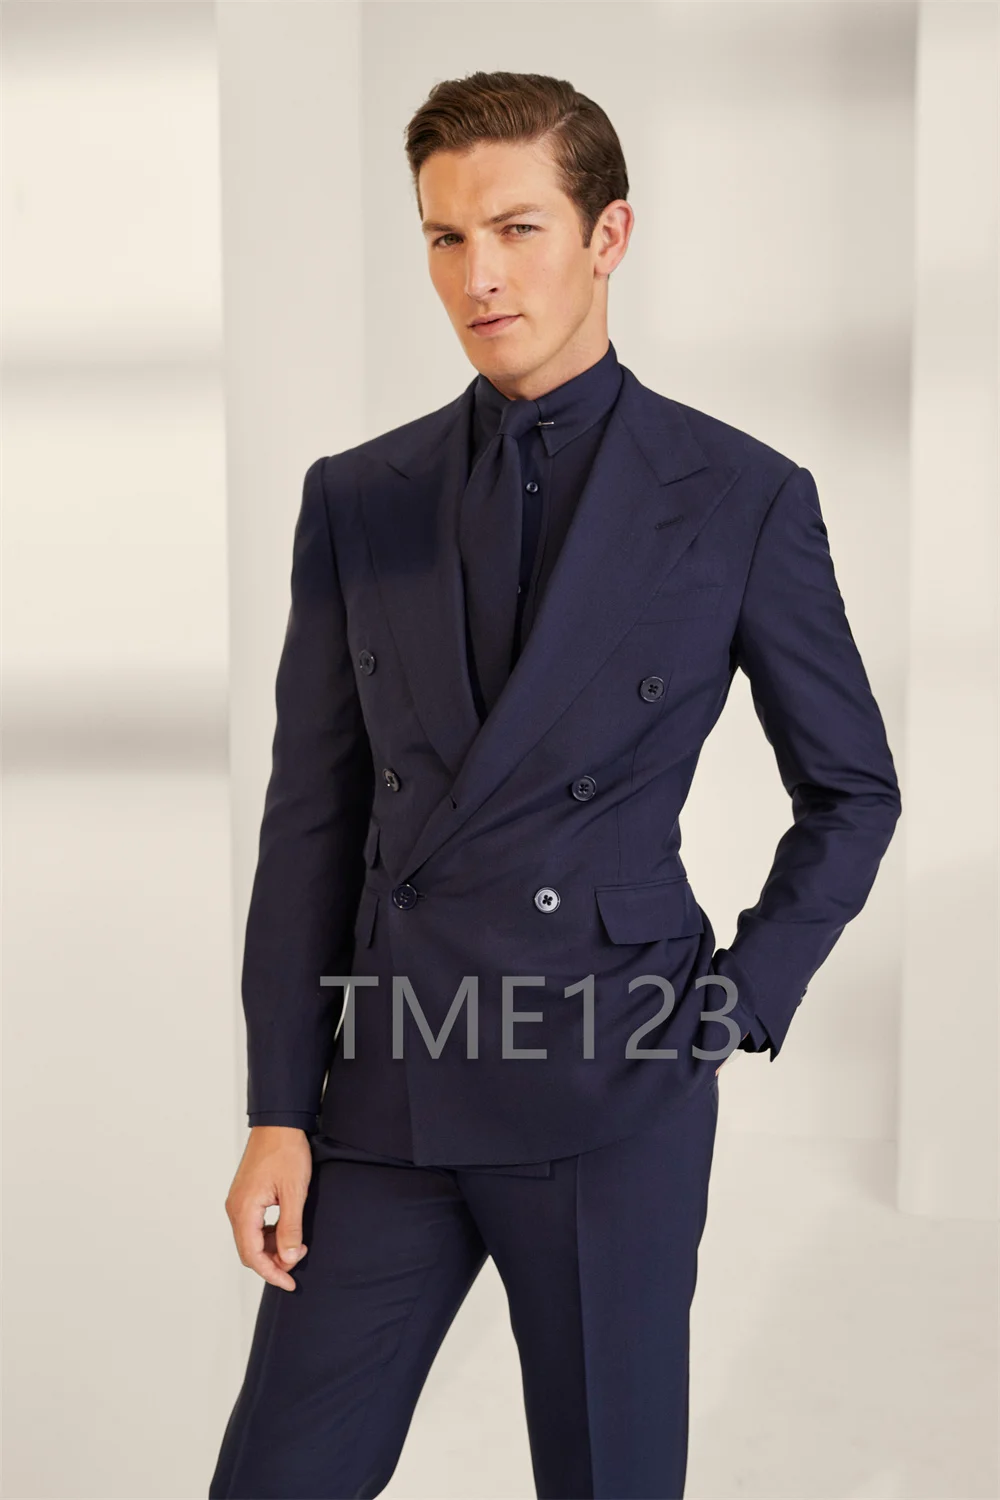 Tailor Made Black Double Breasted Mens Suits Custom Wedding Tuxedos Groom Wear Party Prom Best Men Blazer Suit (Jacket+Pants)